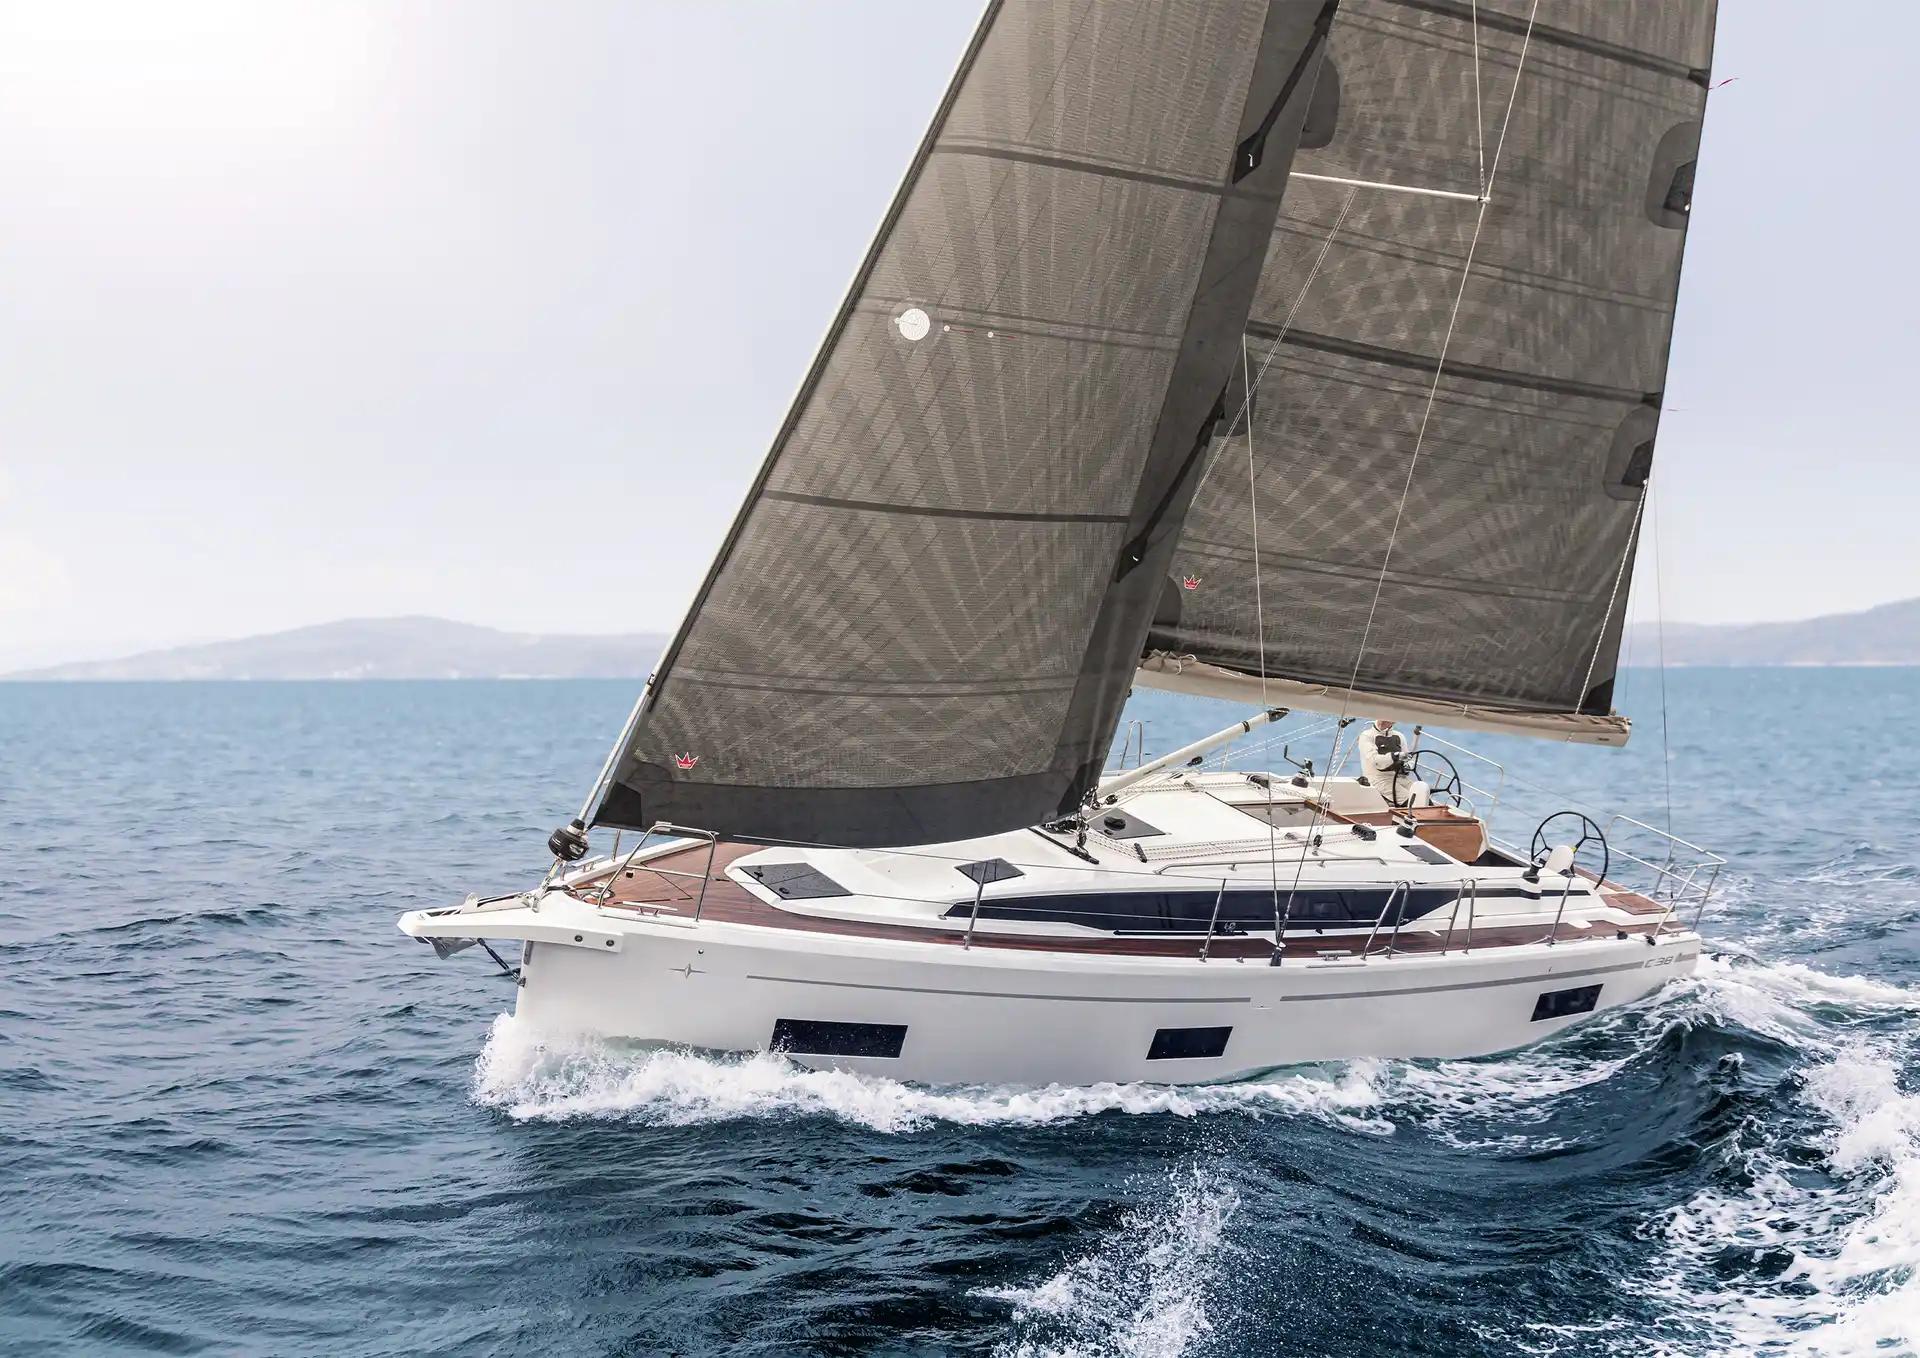 csm_sy-bavaria-yachts-c38-keyvisual-exterieur_9245a6babe.png